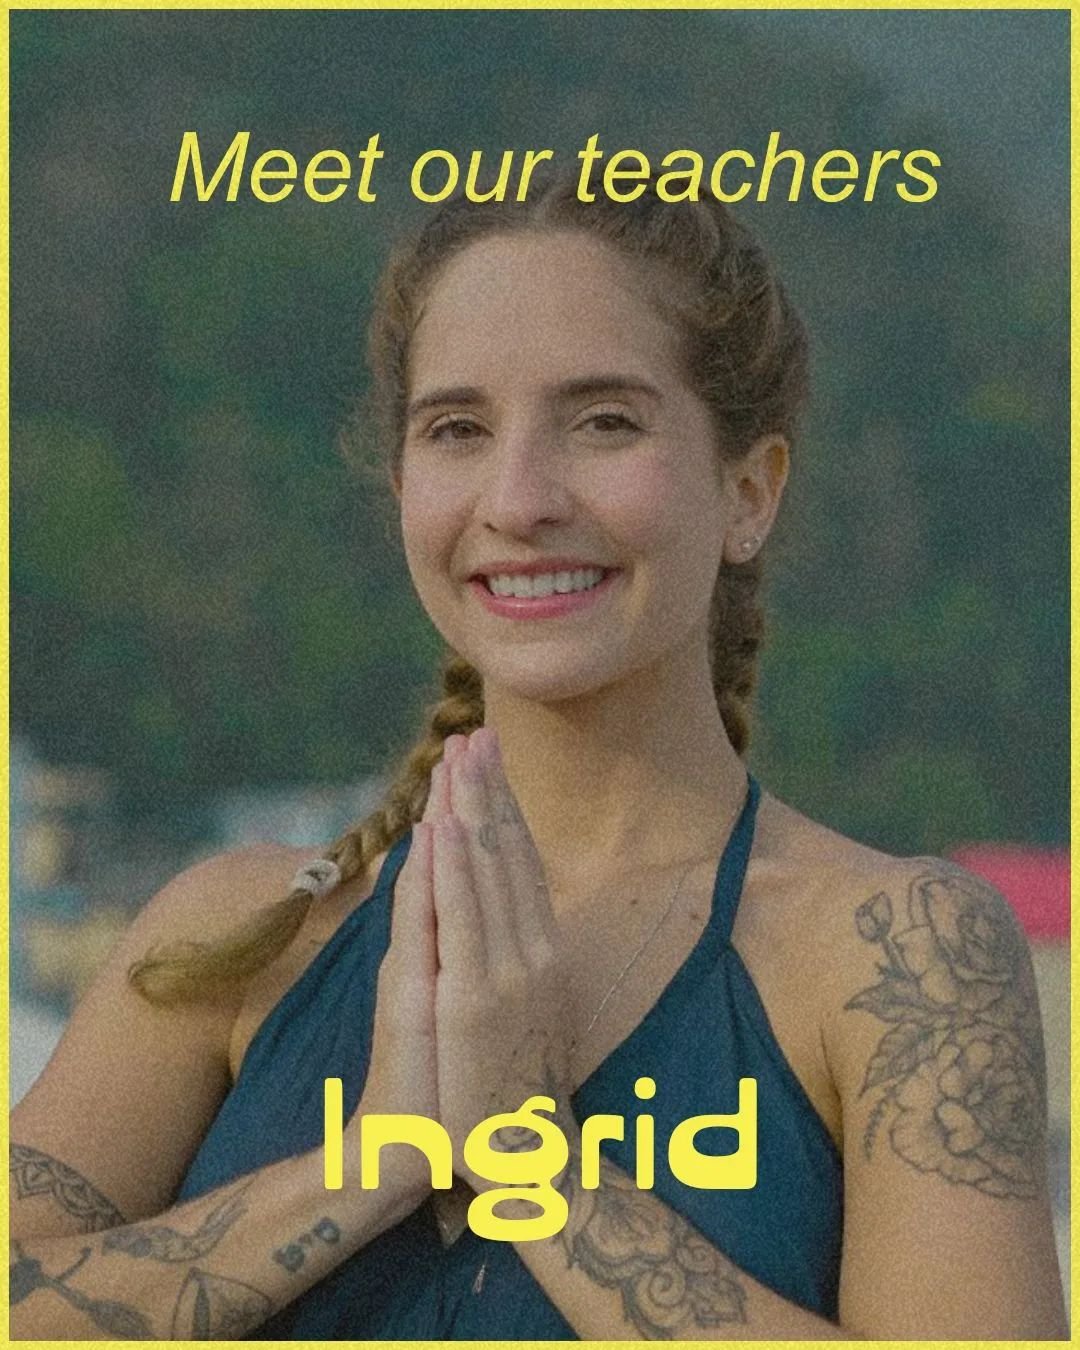 WELCOME INGRID who will be teaching Beginners/ Gentle Yoga every Saturday at 11.15am.

Ingrid's Yoga journey began when she was thirteen years old in Brazil, where she grew up. Since then, she has been practicing Yoga daily, while also integrating th